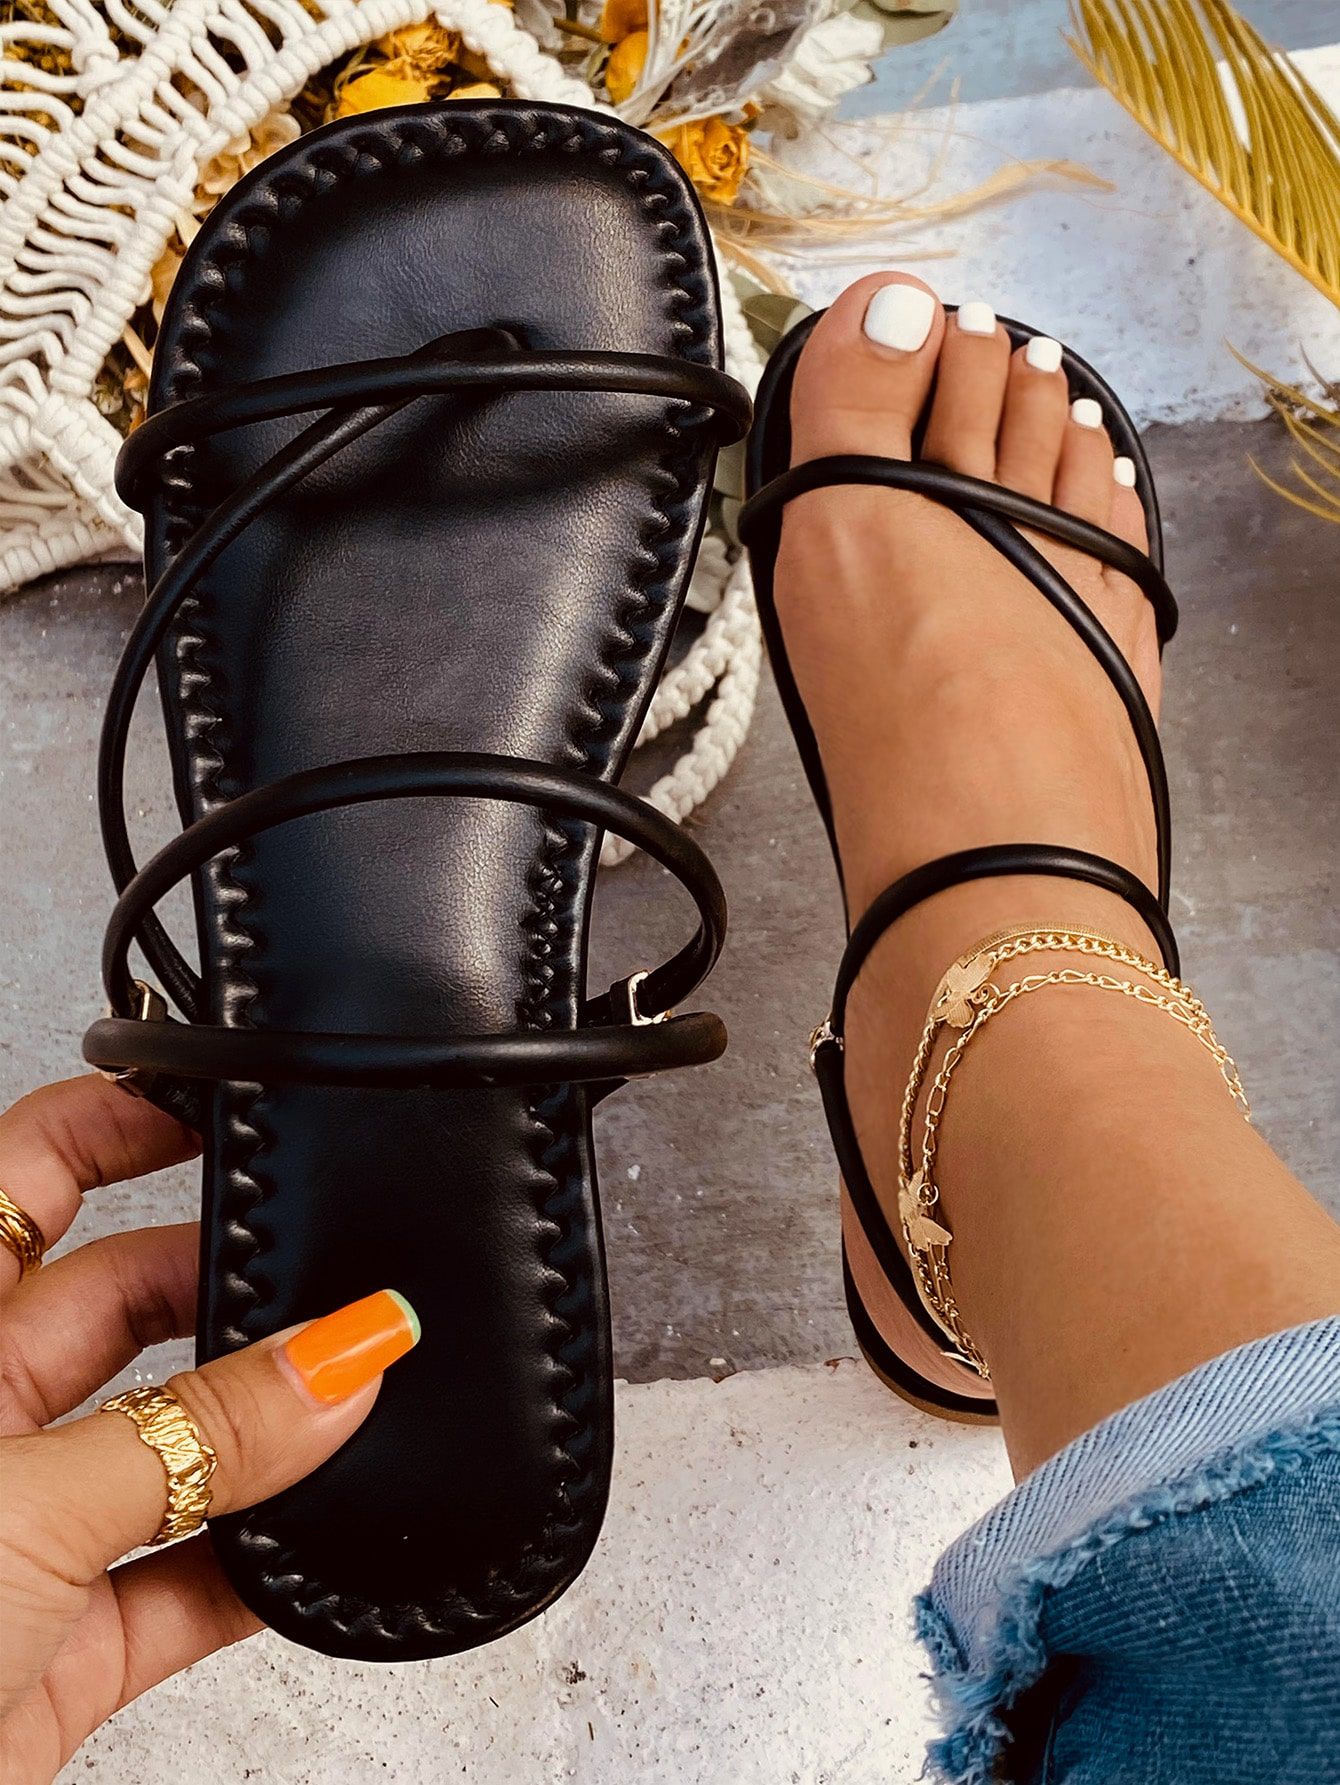 Thong Sandals Outfit Ideas for
  Women